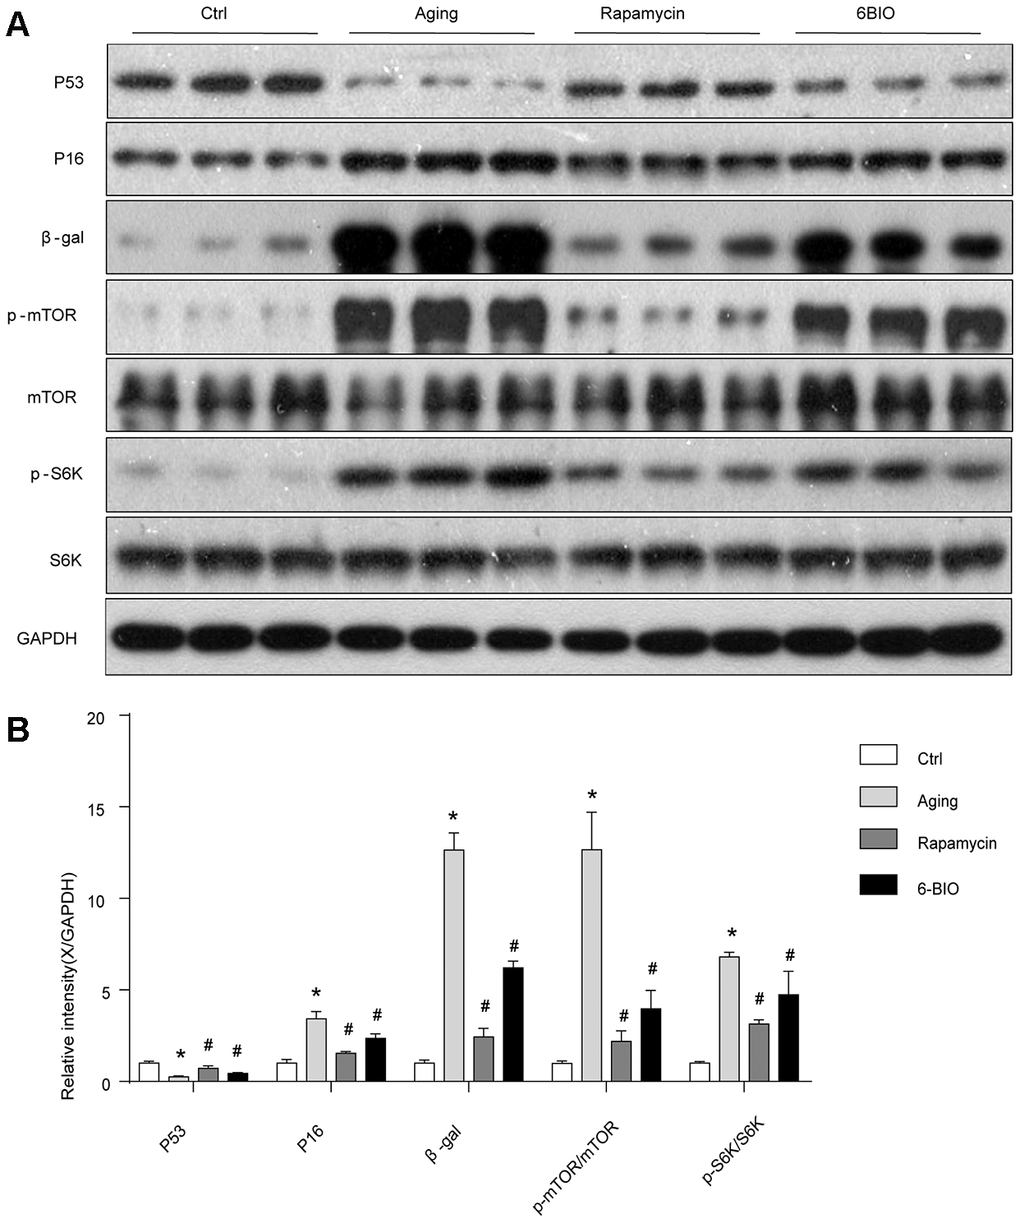 (A, B) Senescence markers and the mTOR/S6K pathway in vivo analyzed by Western blot. *P